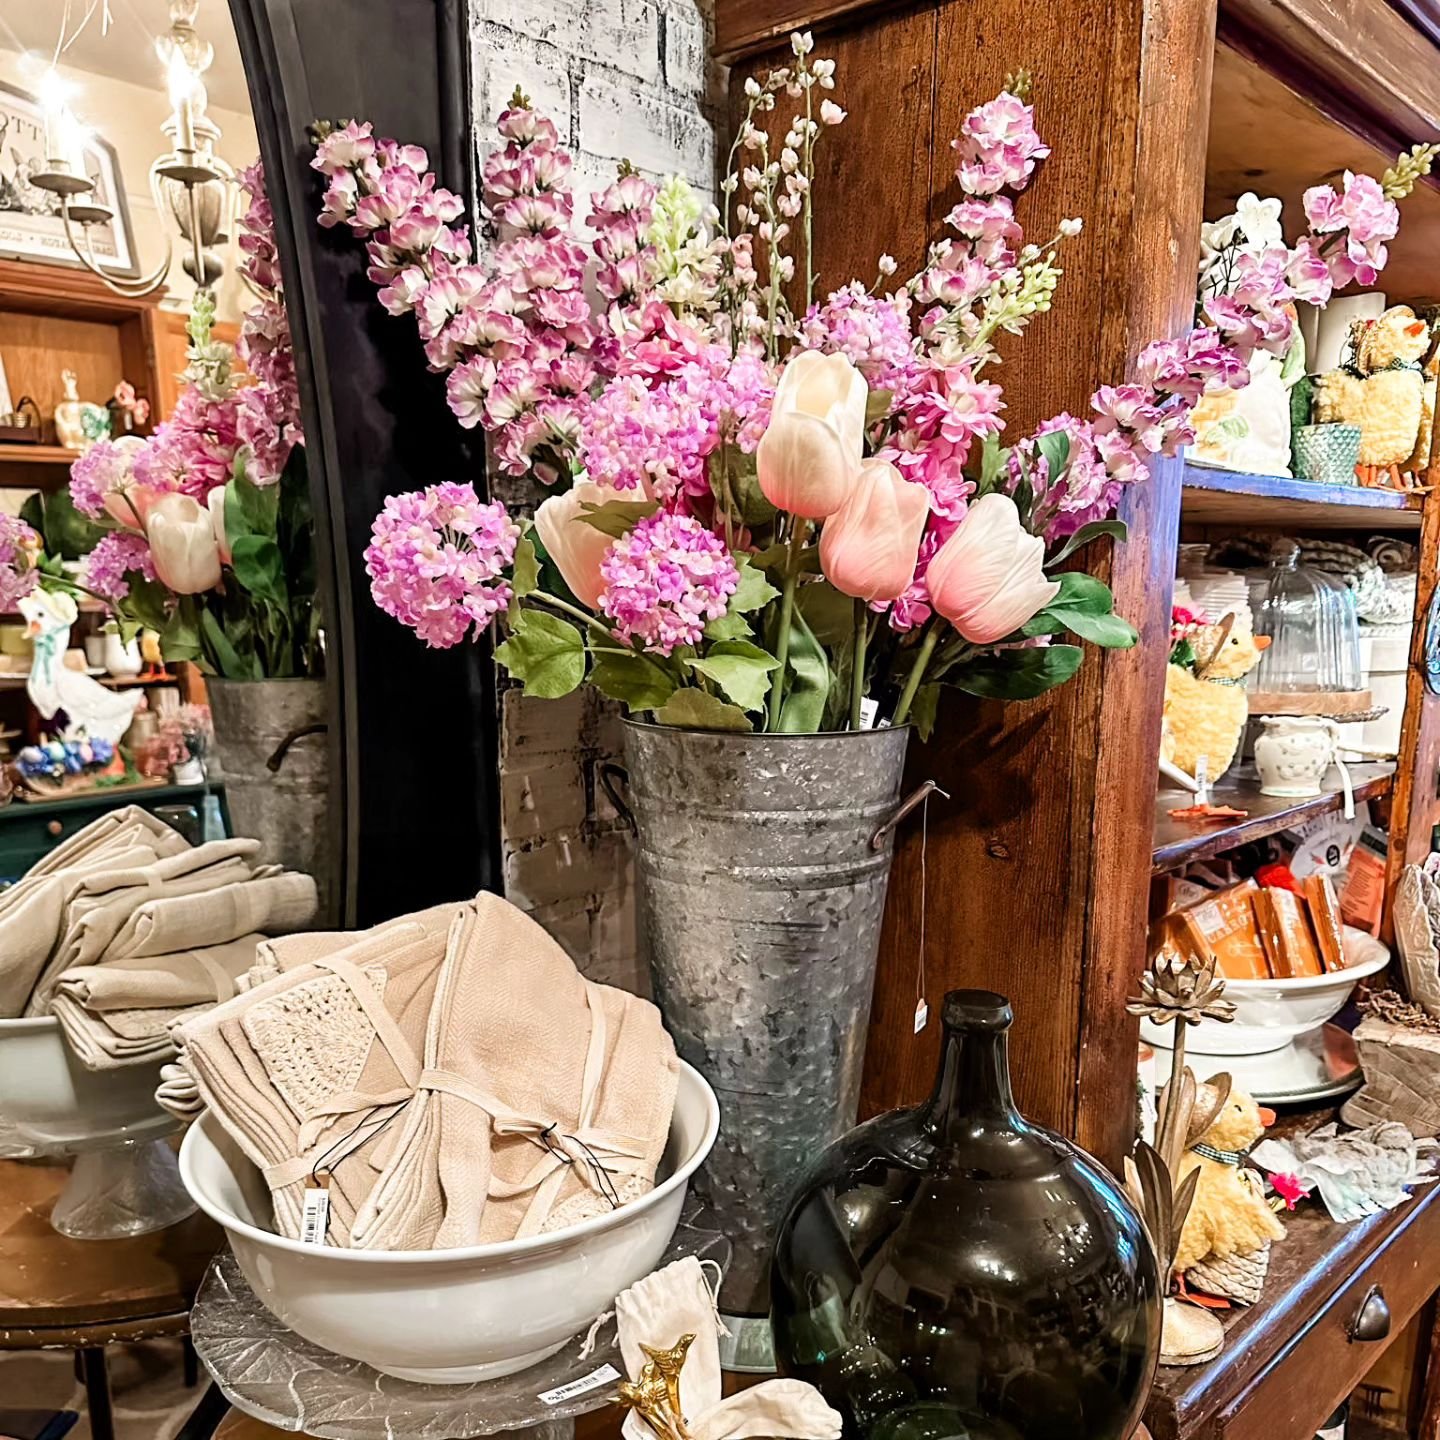 We're ready for spring florals! And we've stocked up!

Create your own bouquet at our Meet Me in the Garden Pop-up! 💐

April 19-21
Friday &amp; Saturday: 10am-5pm
Sunday: 10am-4pm
1235 Eddy Street | Gardnerville, Nevada

#aprilpopup #GardenHomeDecor